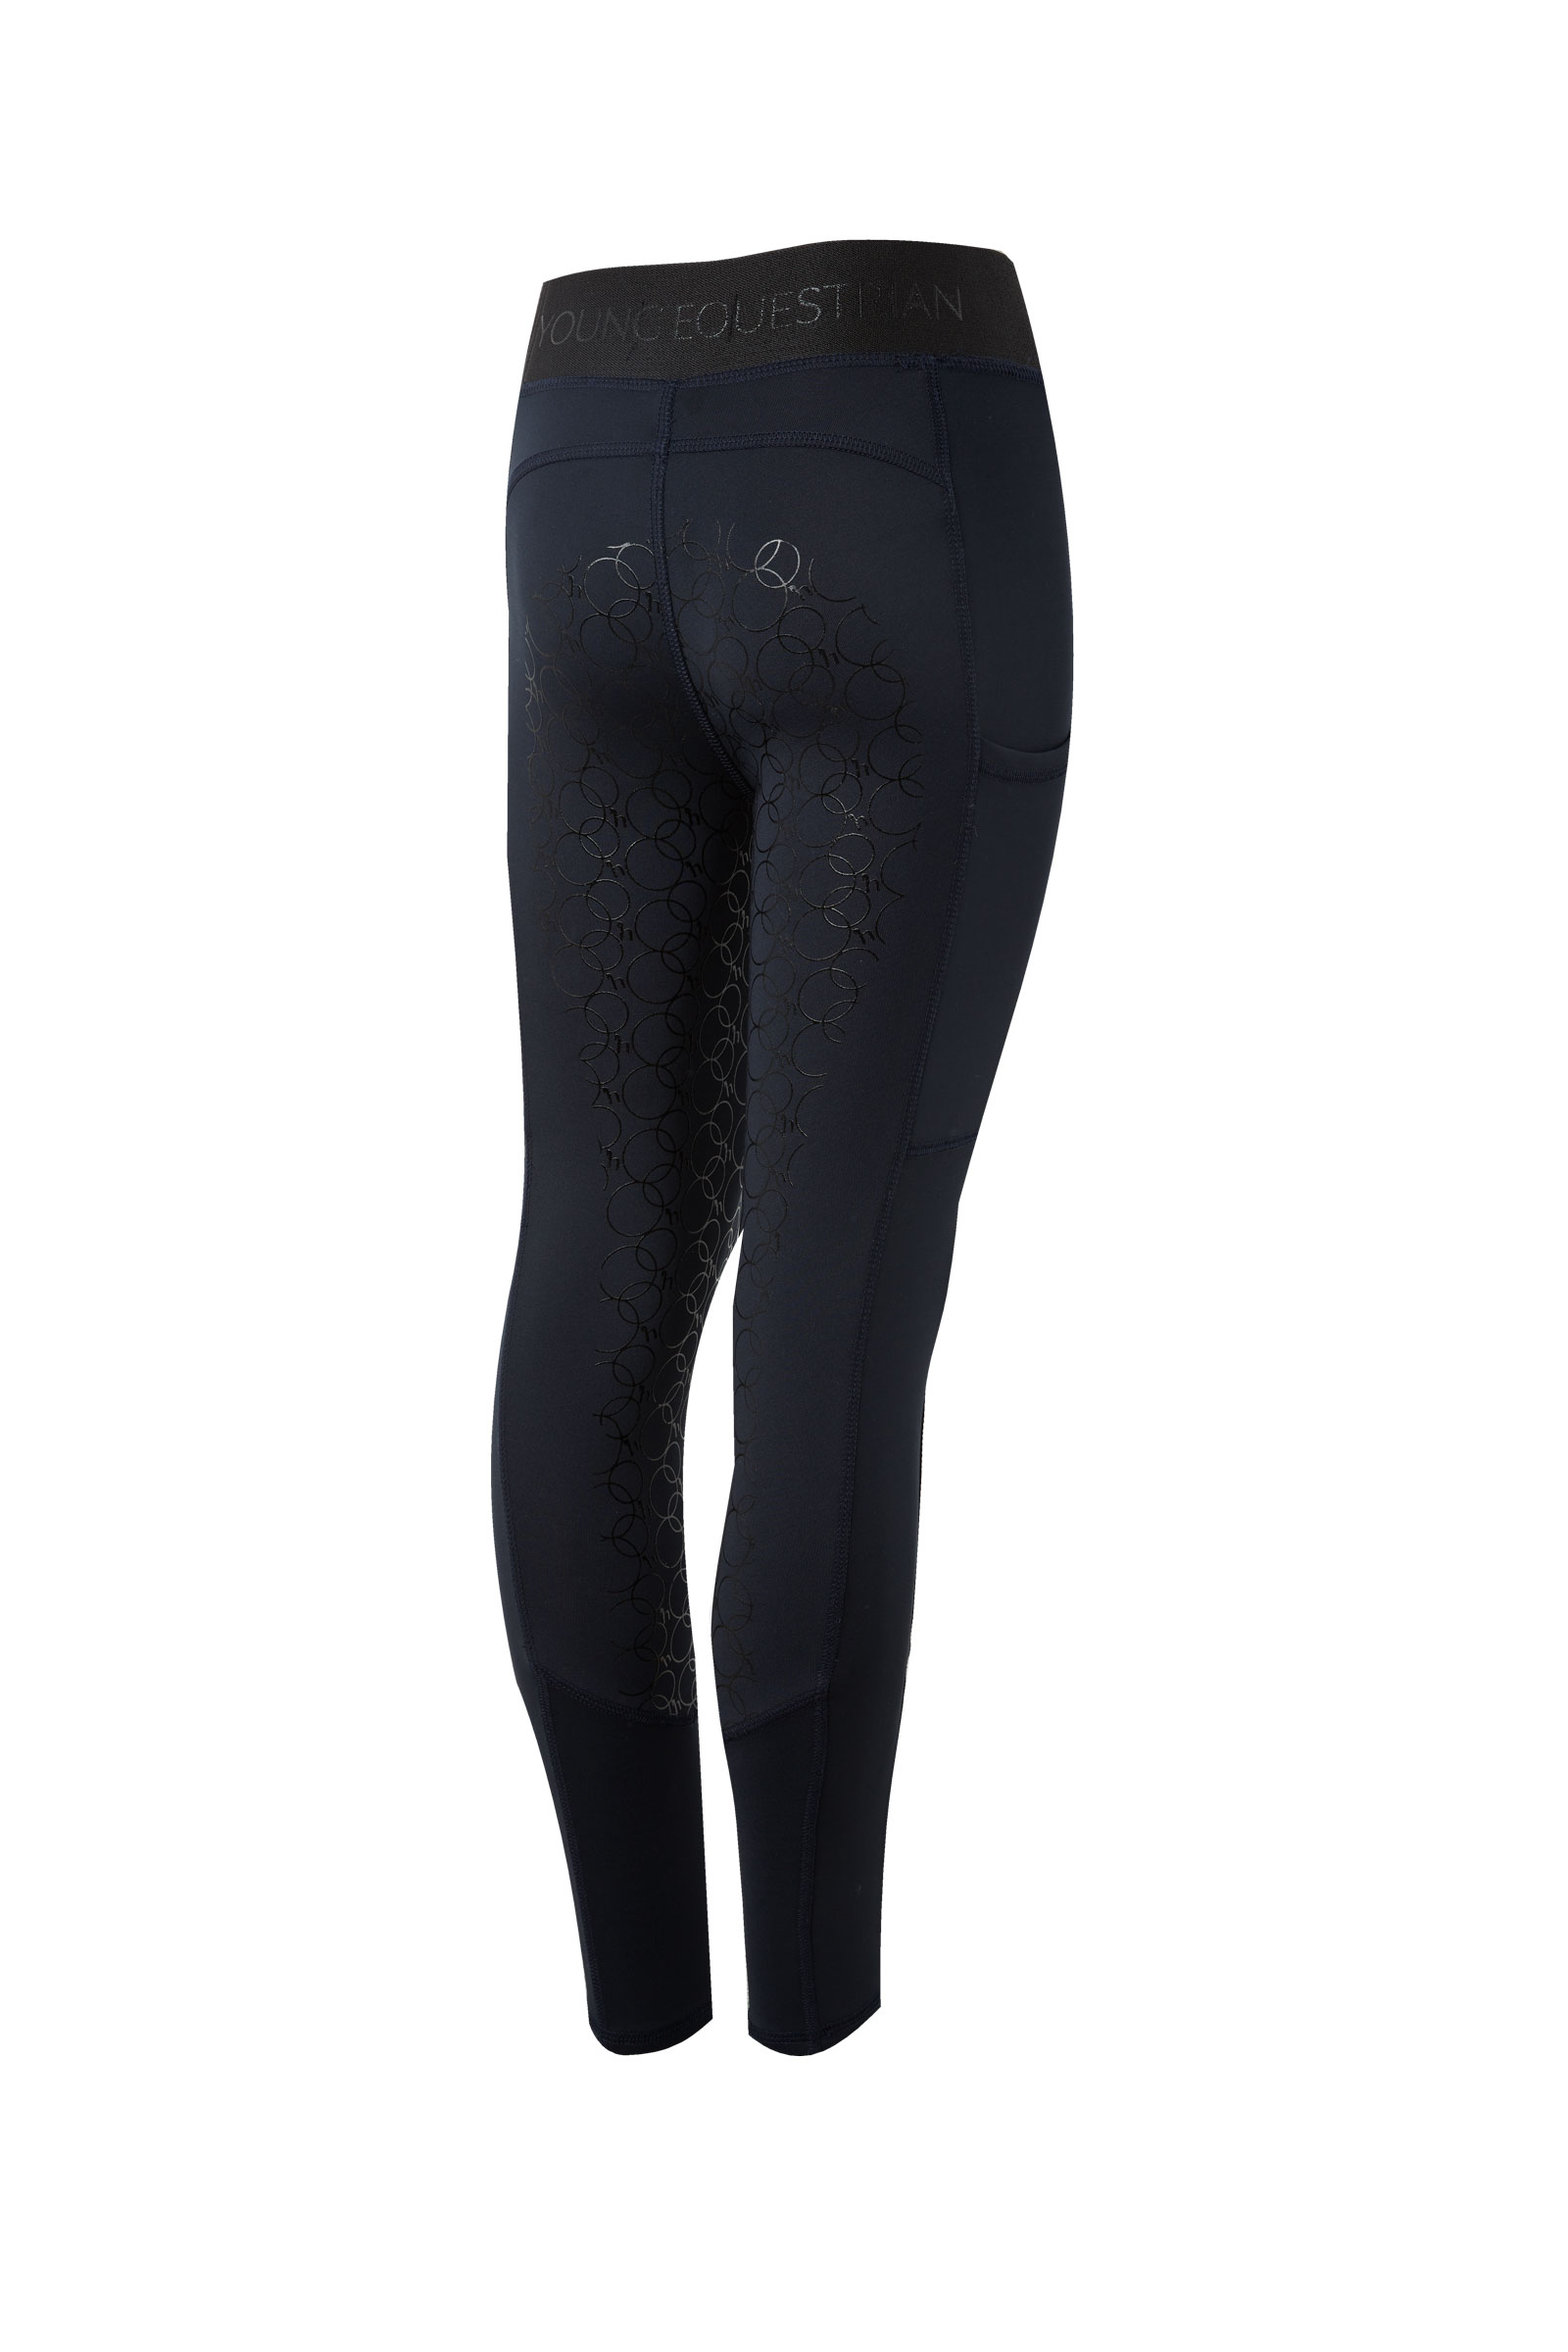 Spring Riding Tights in Navy with silicone grip seat - Plum Tack